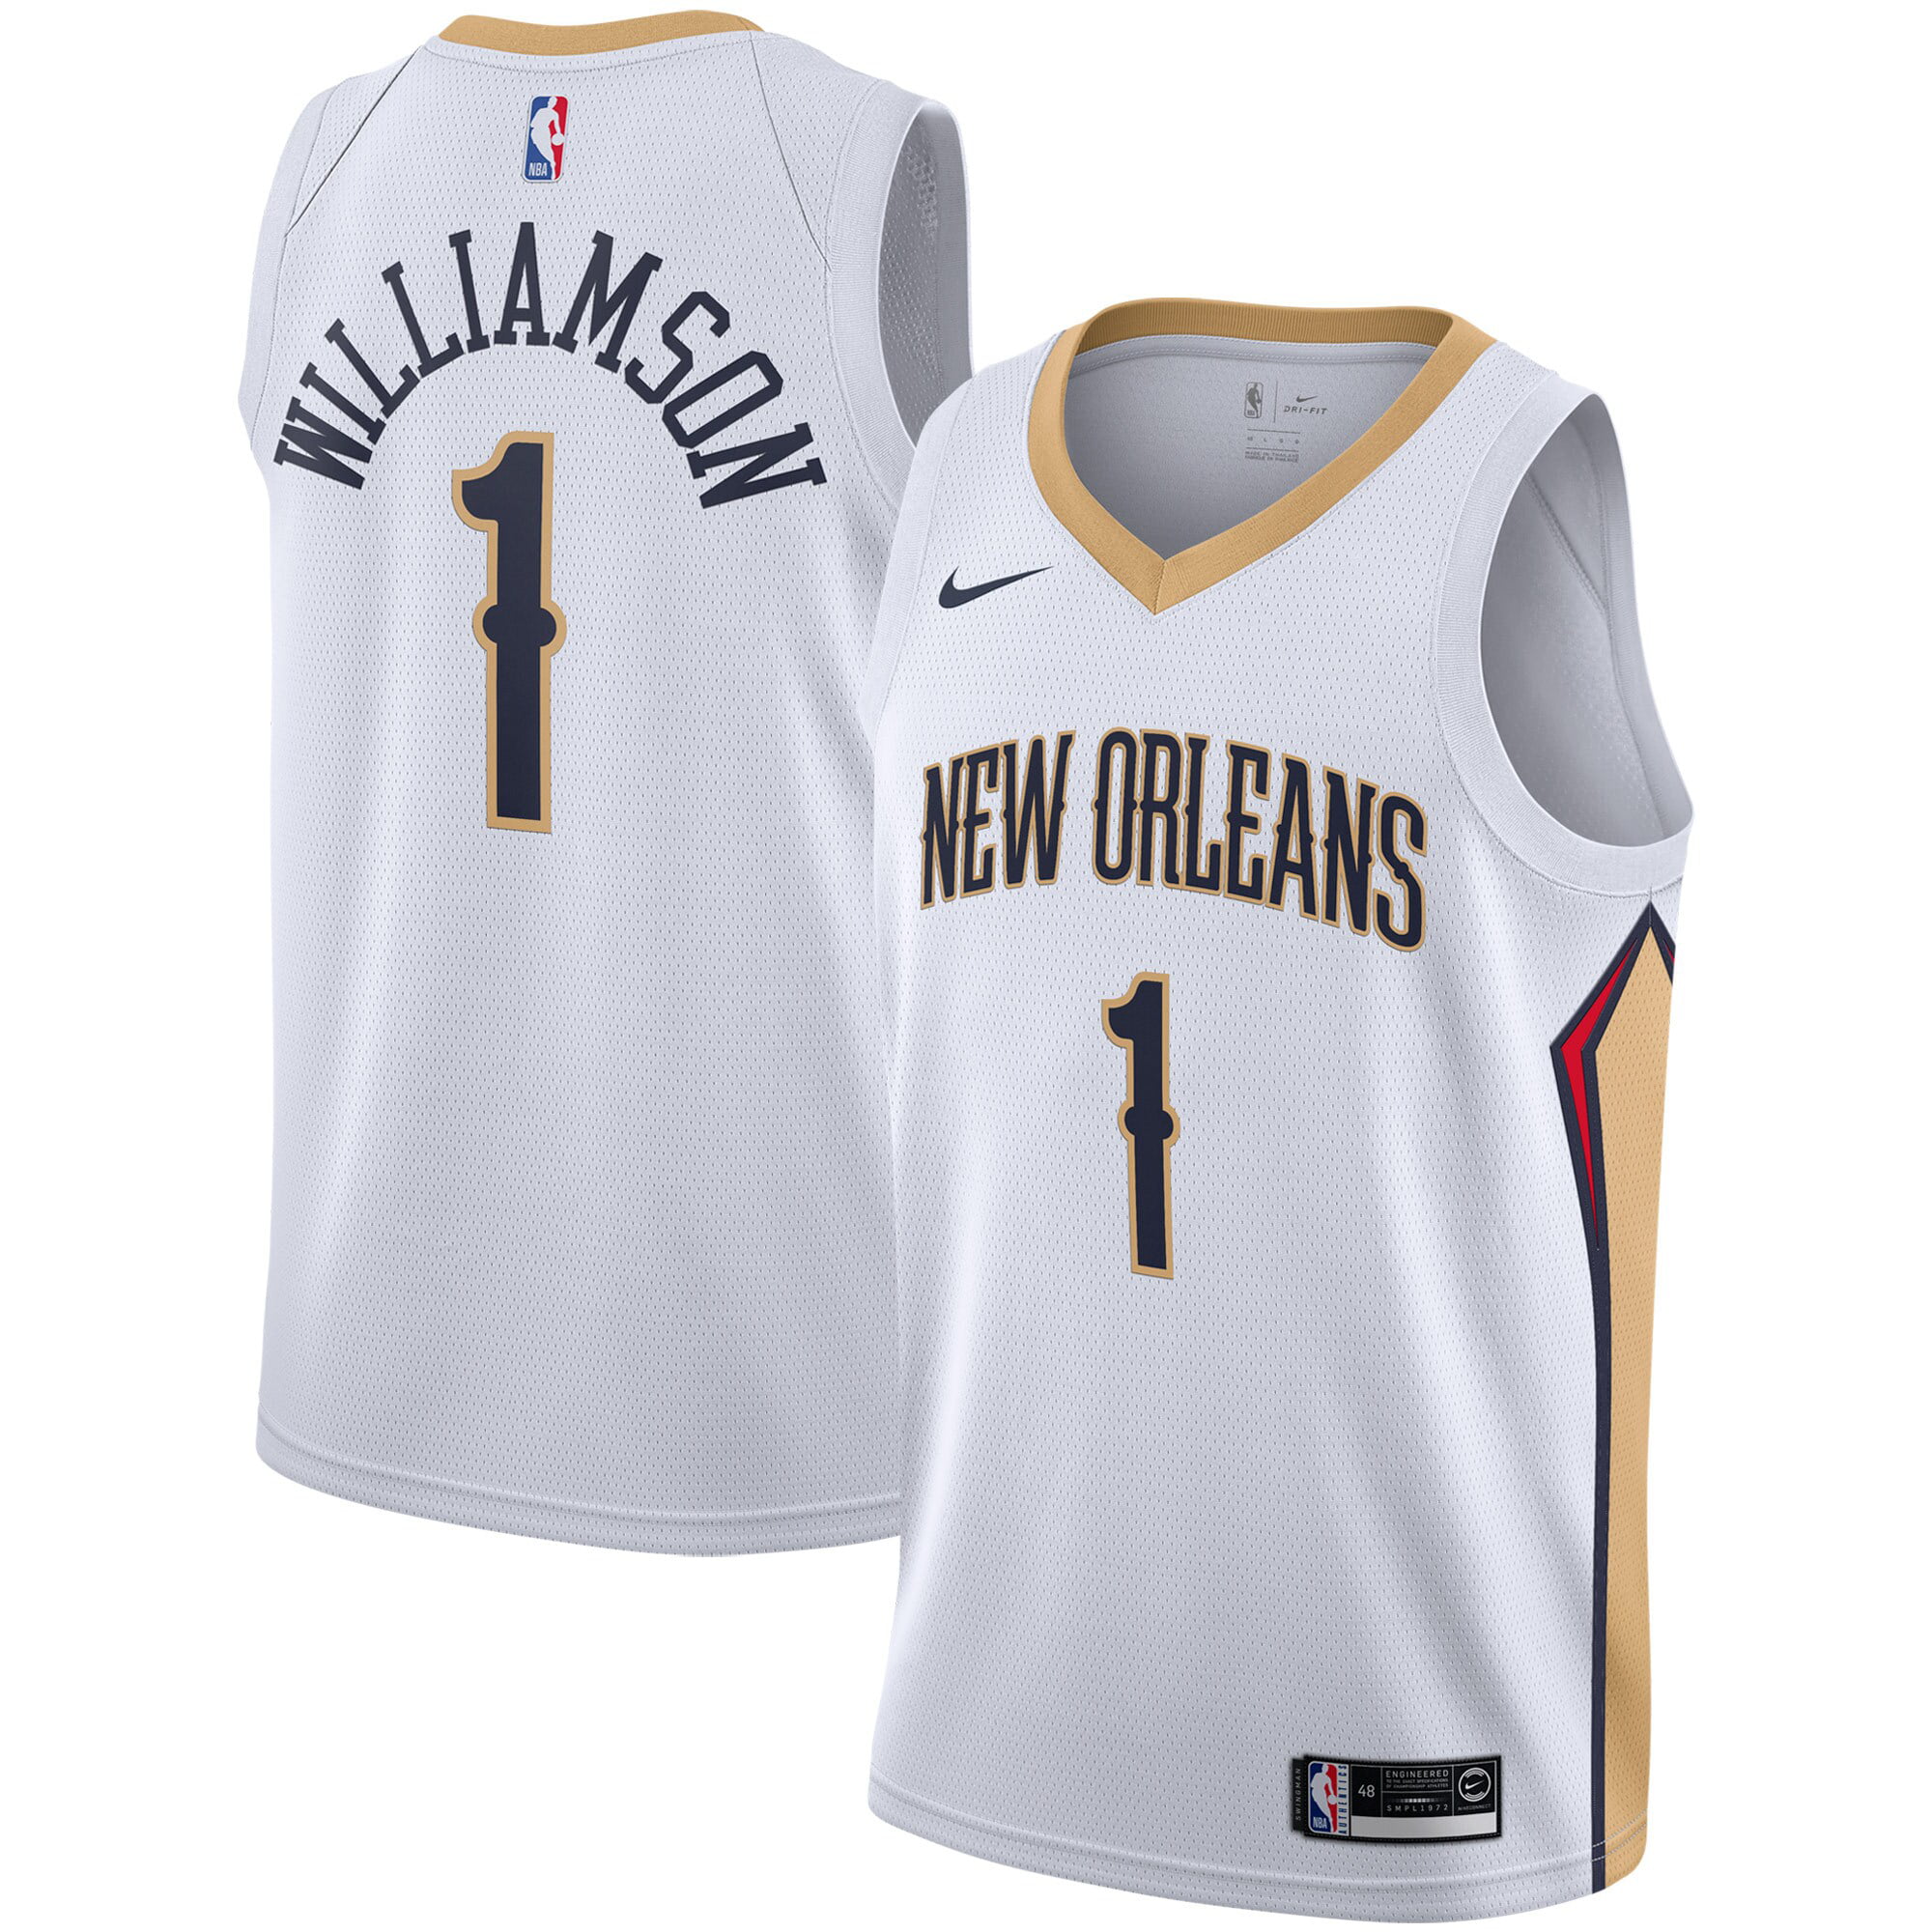 zion williamson jersey youth size